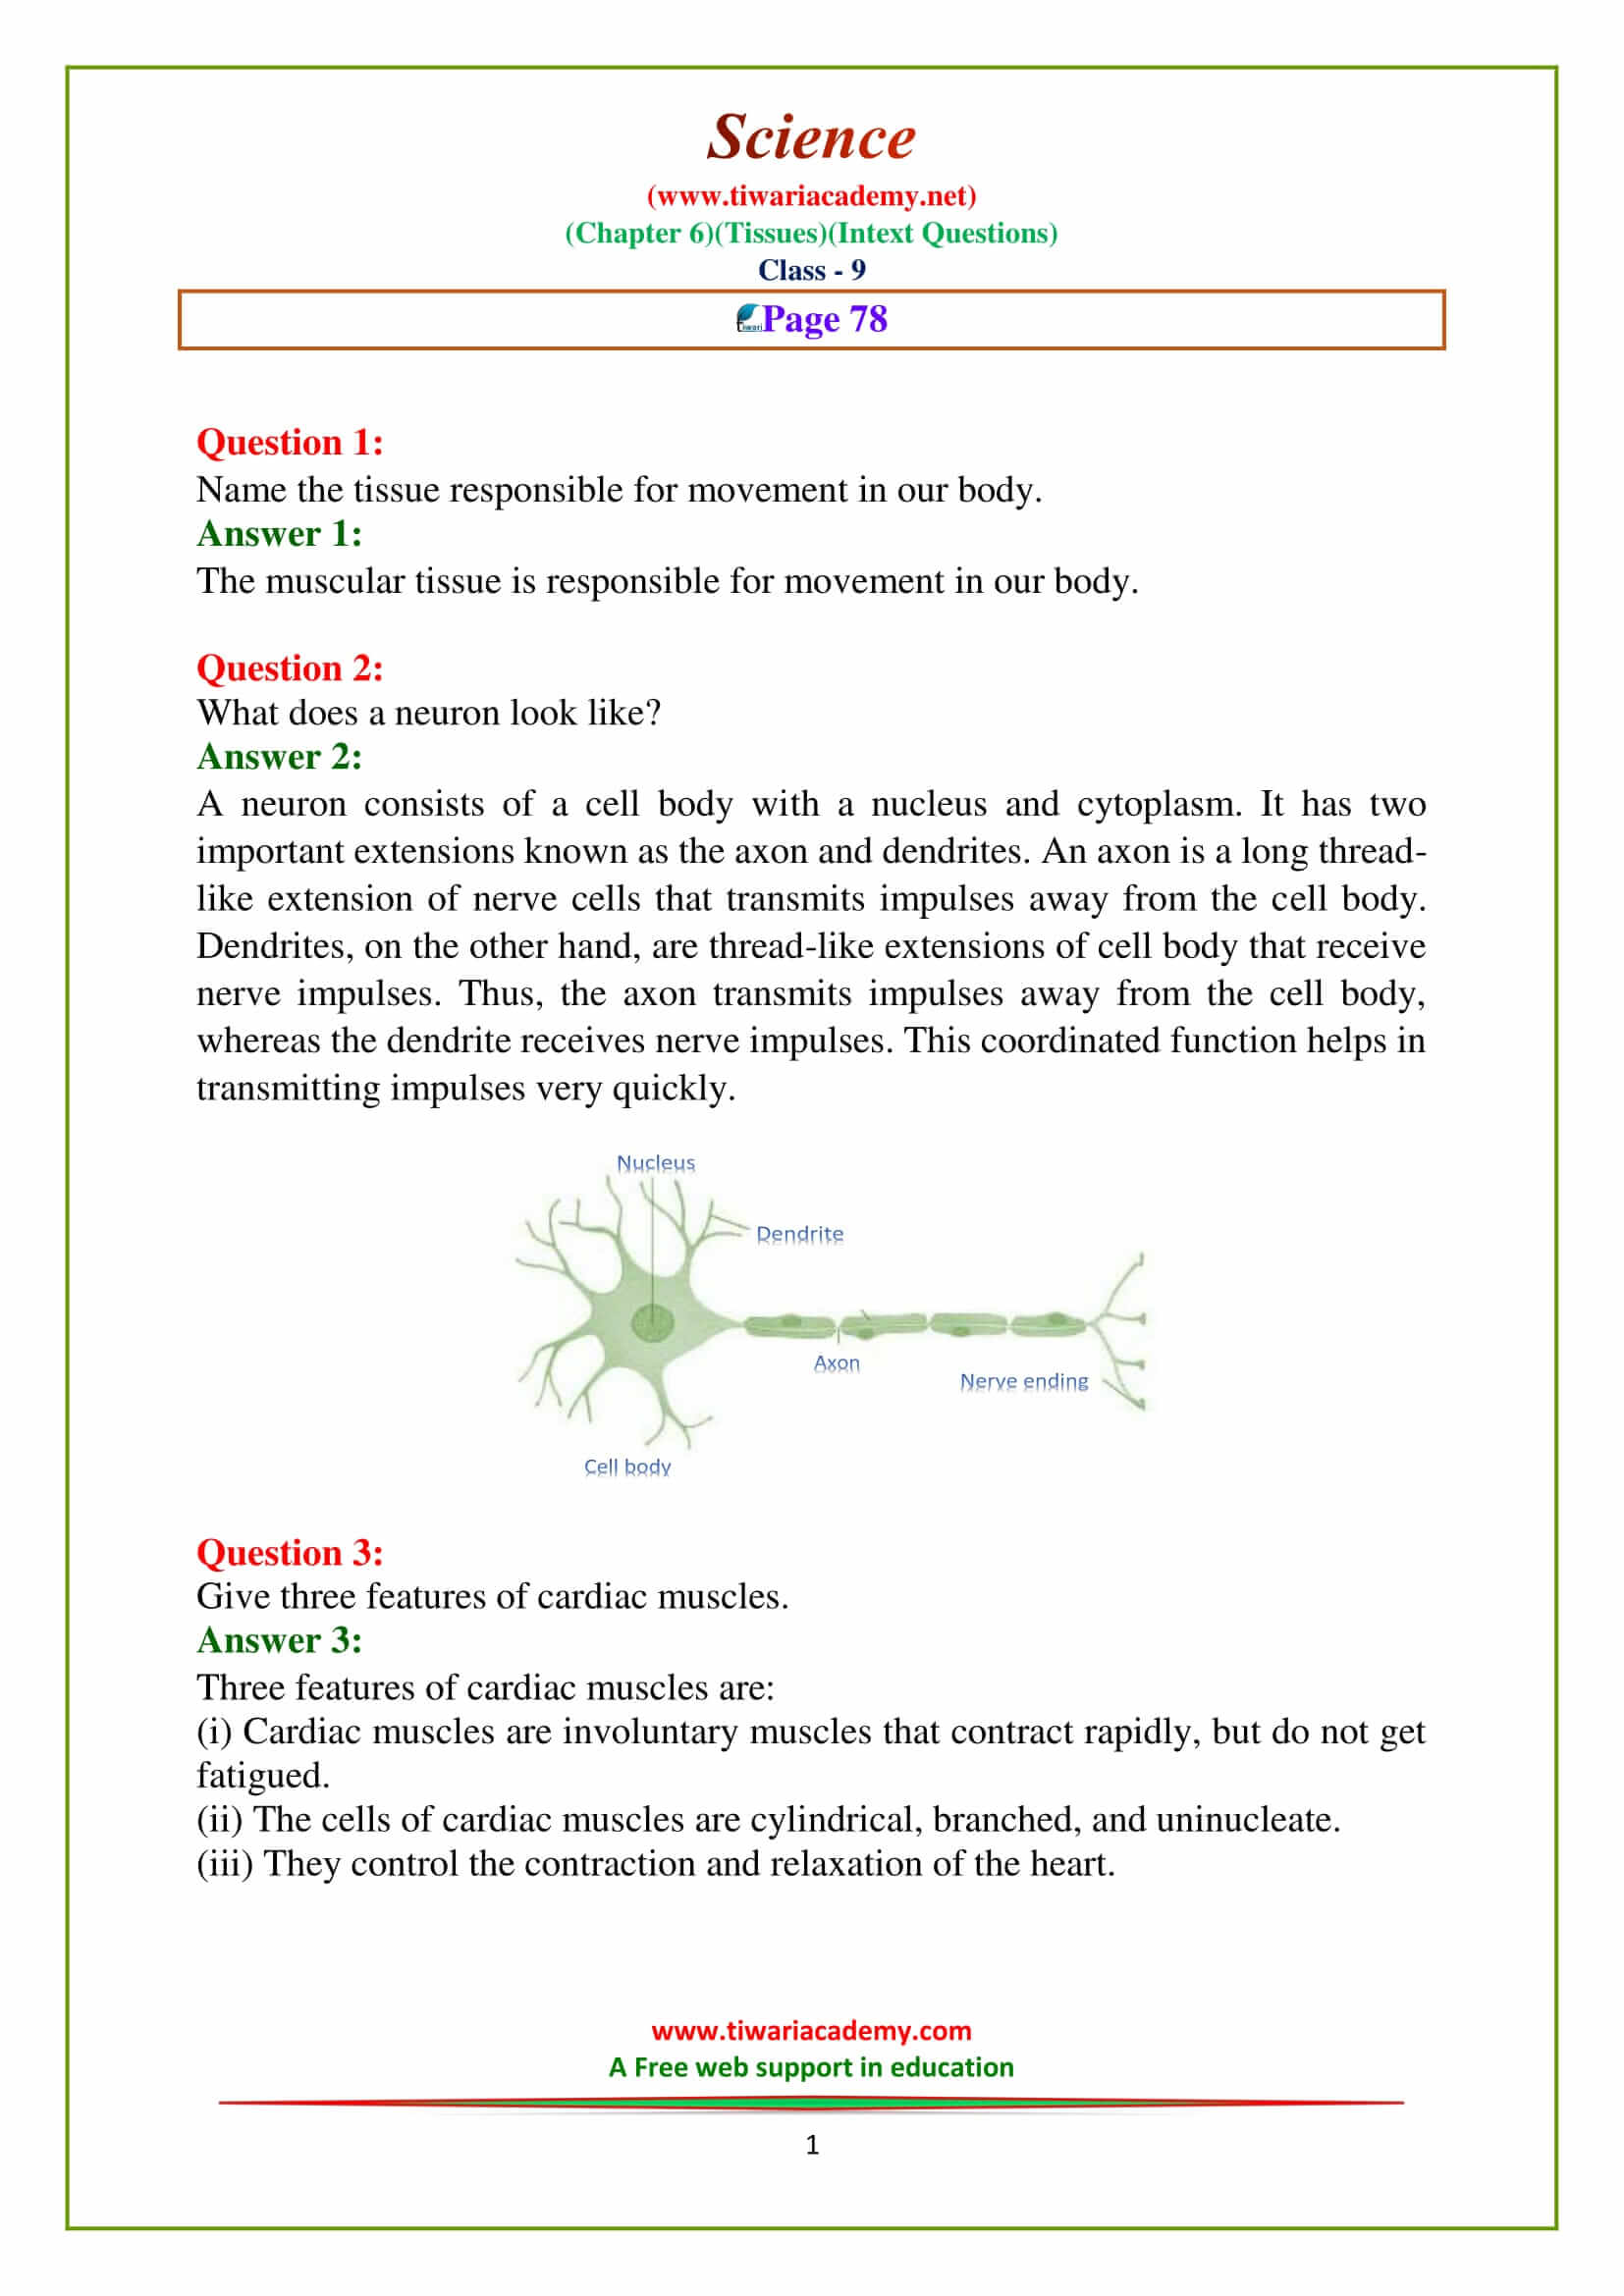 NCERT Solutions for Class 9 Science Chapter 6 Tissues Intext Questions of Page 78